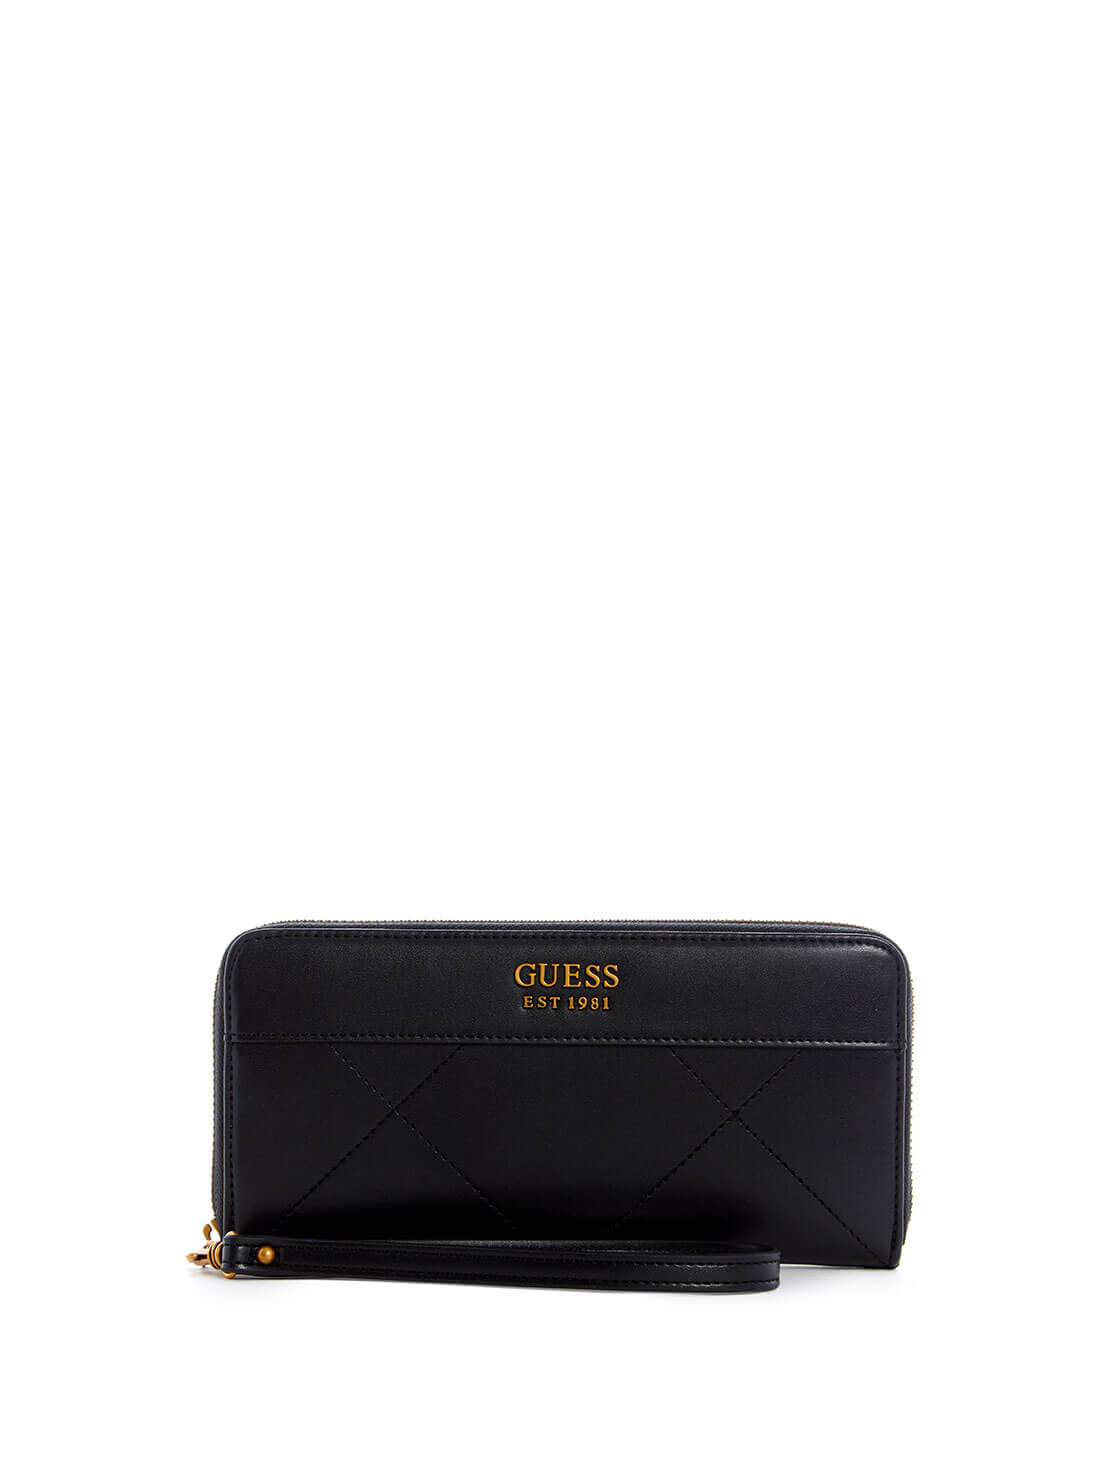 GUESS Womens Black Katey Large Wallet QA787046 Front View